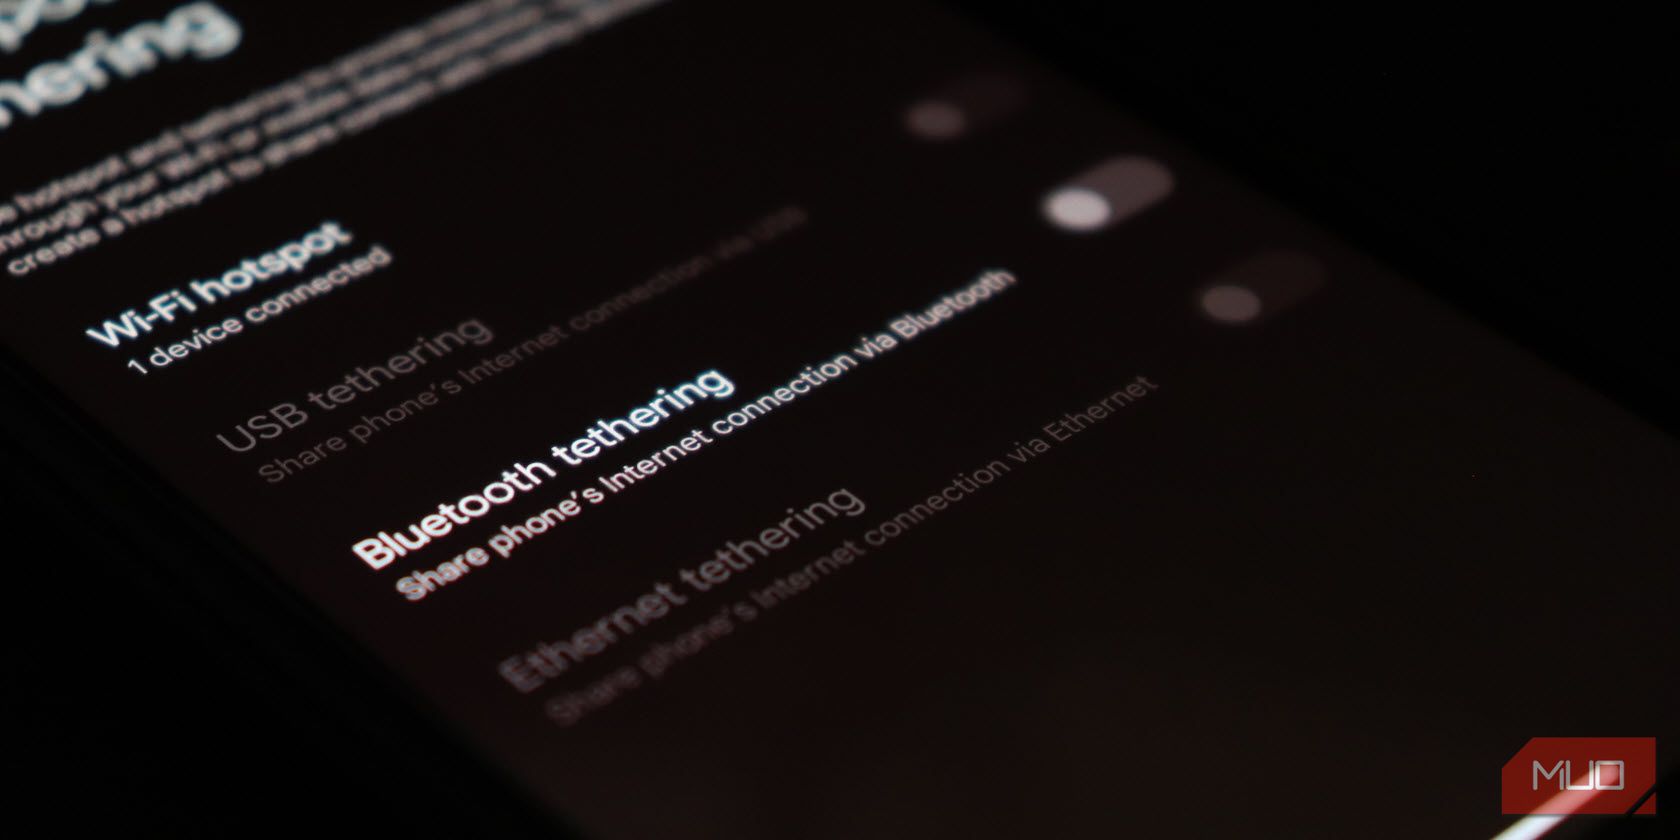 Bluetooth tethering option shown on a phone screen